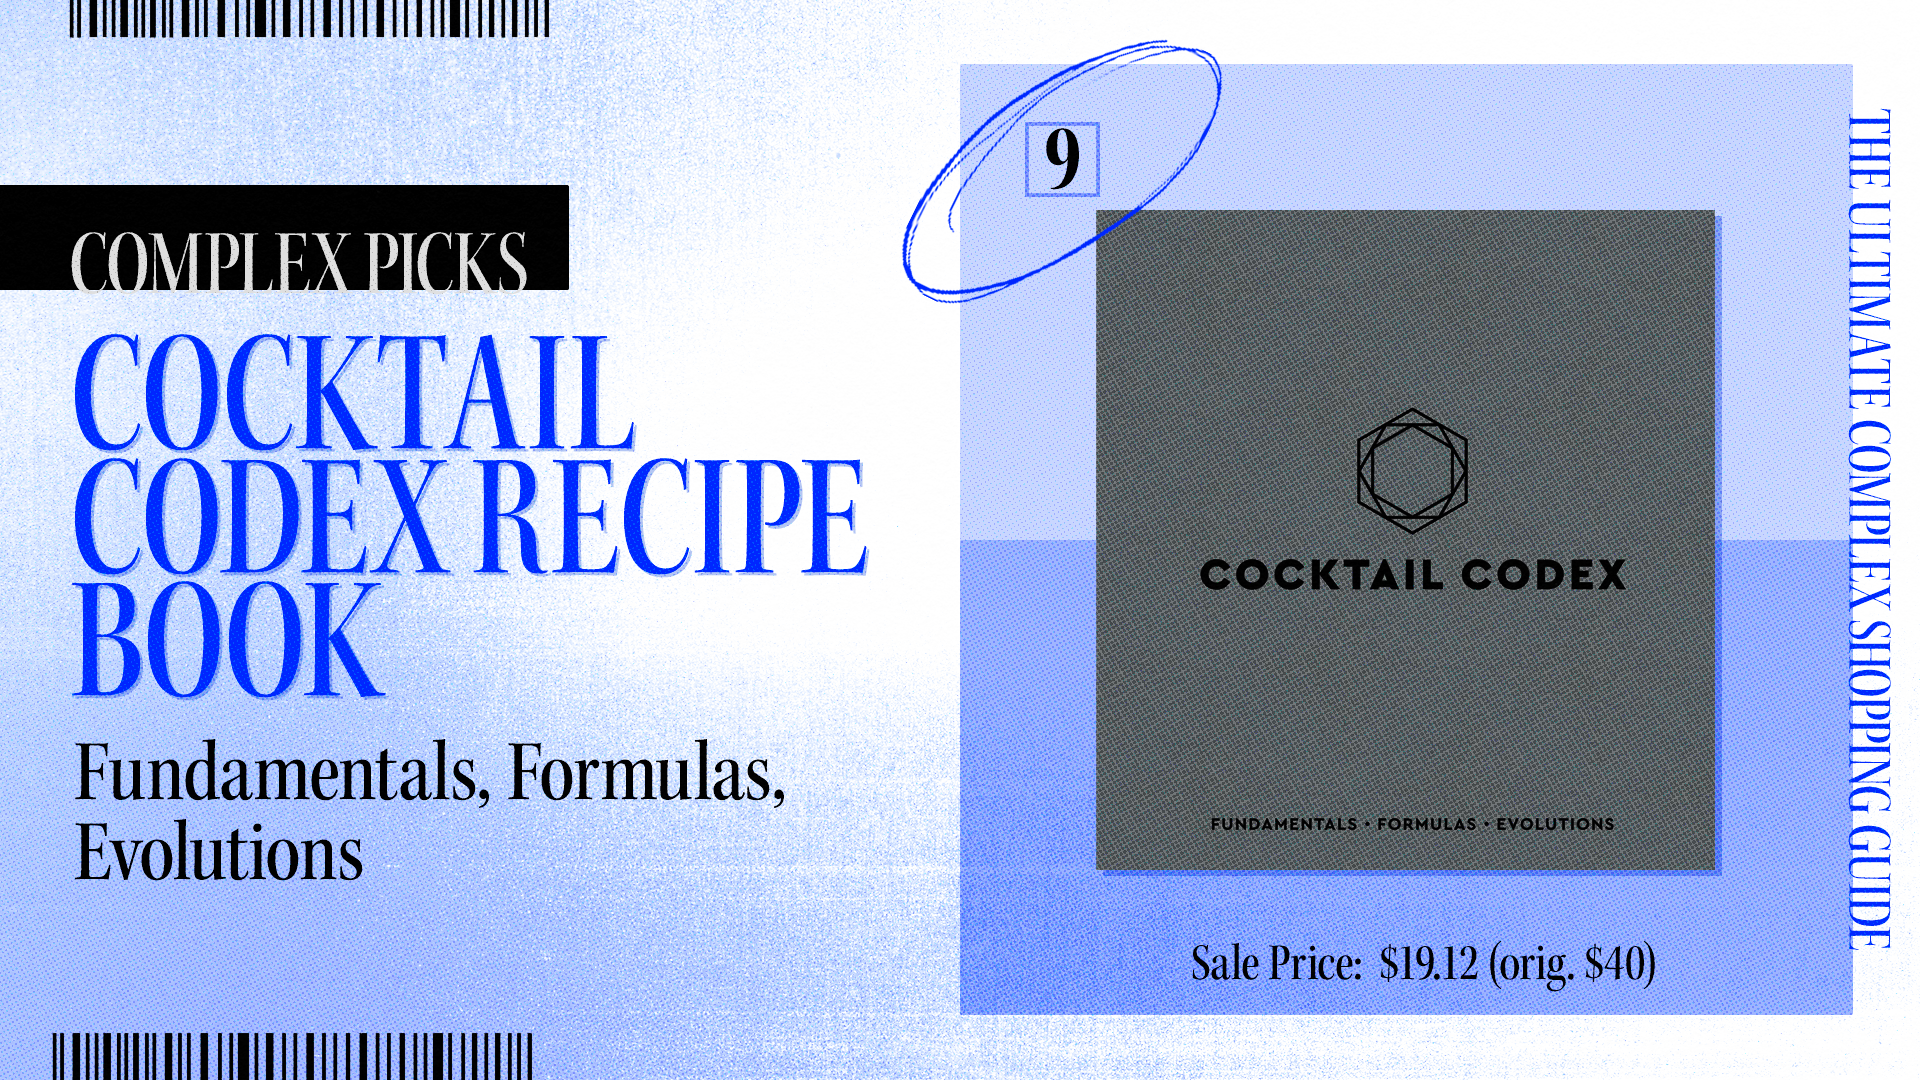 Complex Picks&#x27; featured item &quot;Cocktail Codex Recipe Book&quot; with a sale price of $19.12. The book covers fundamentals, formulas, and evolutions